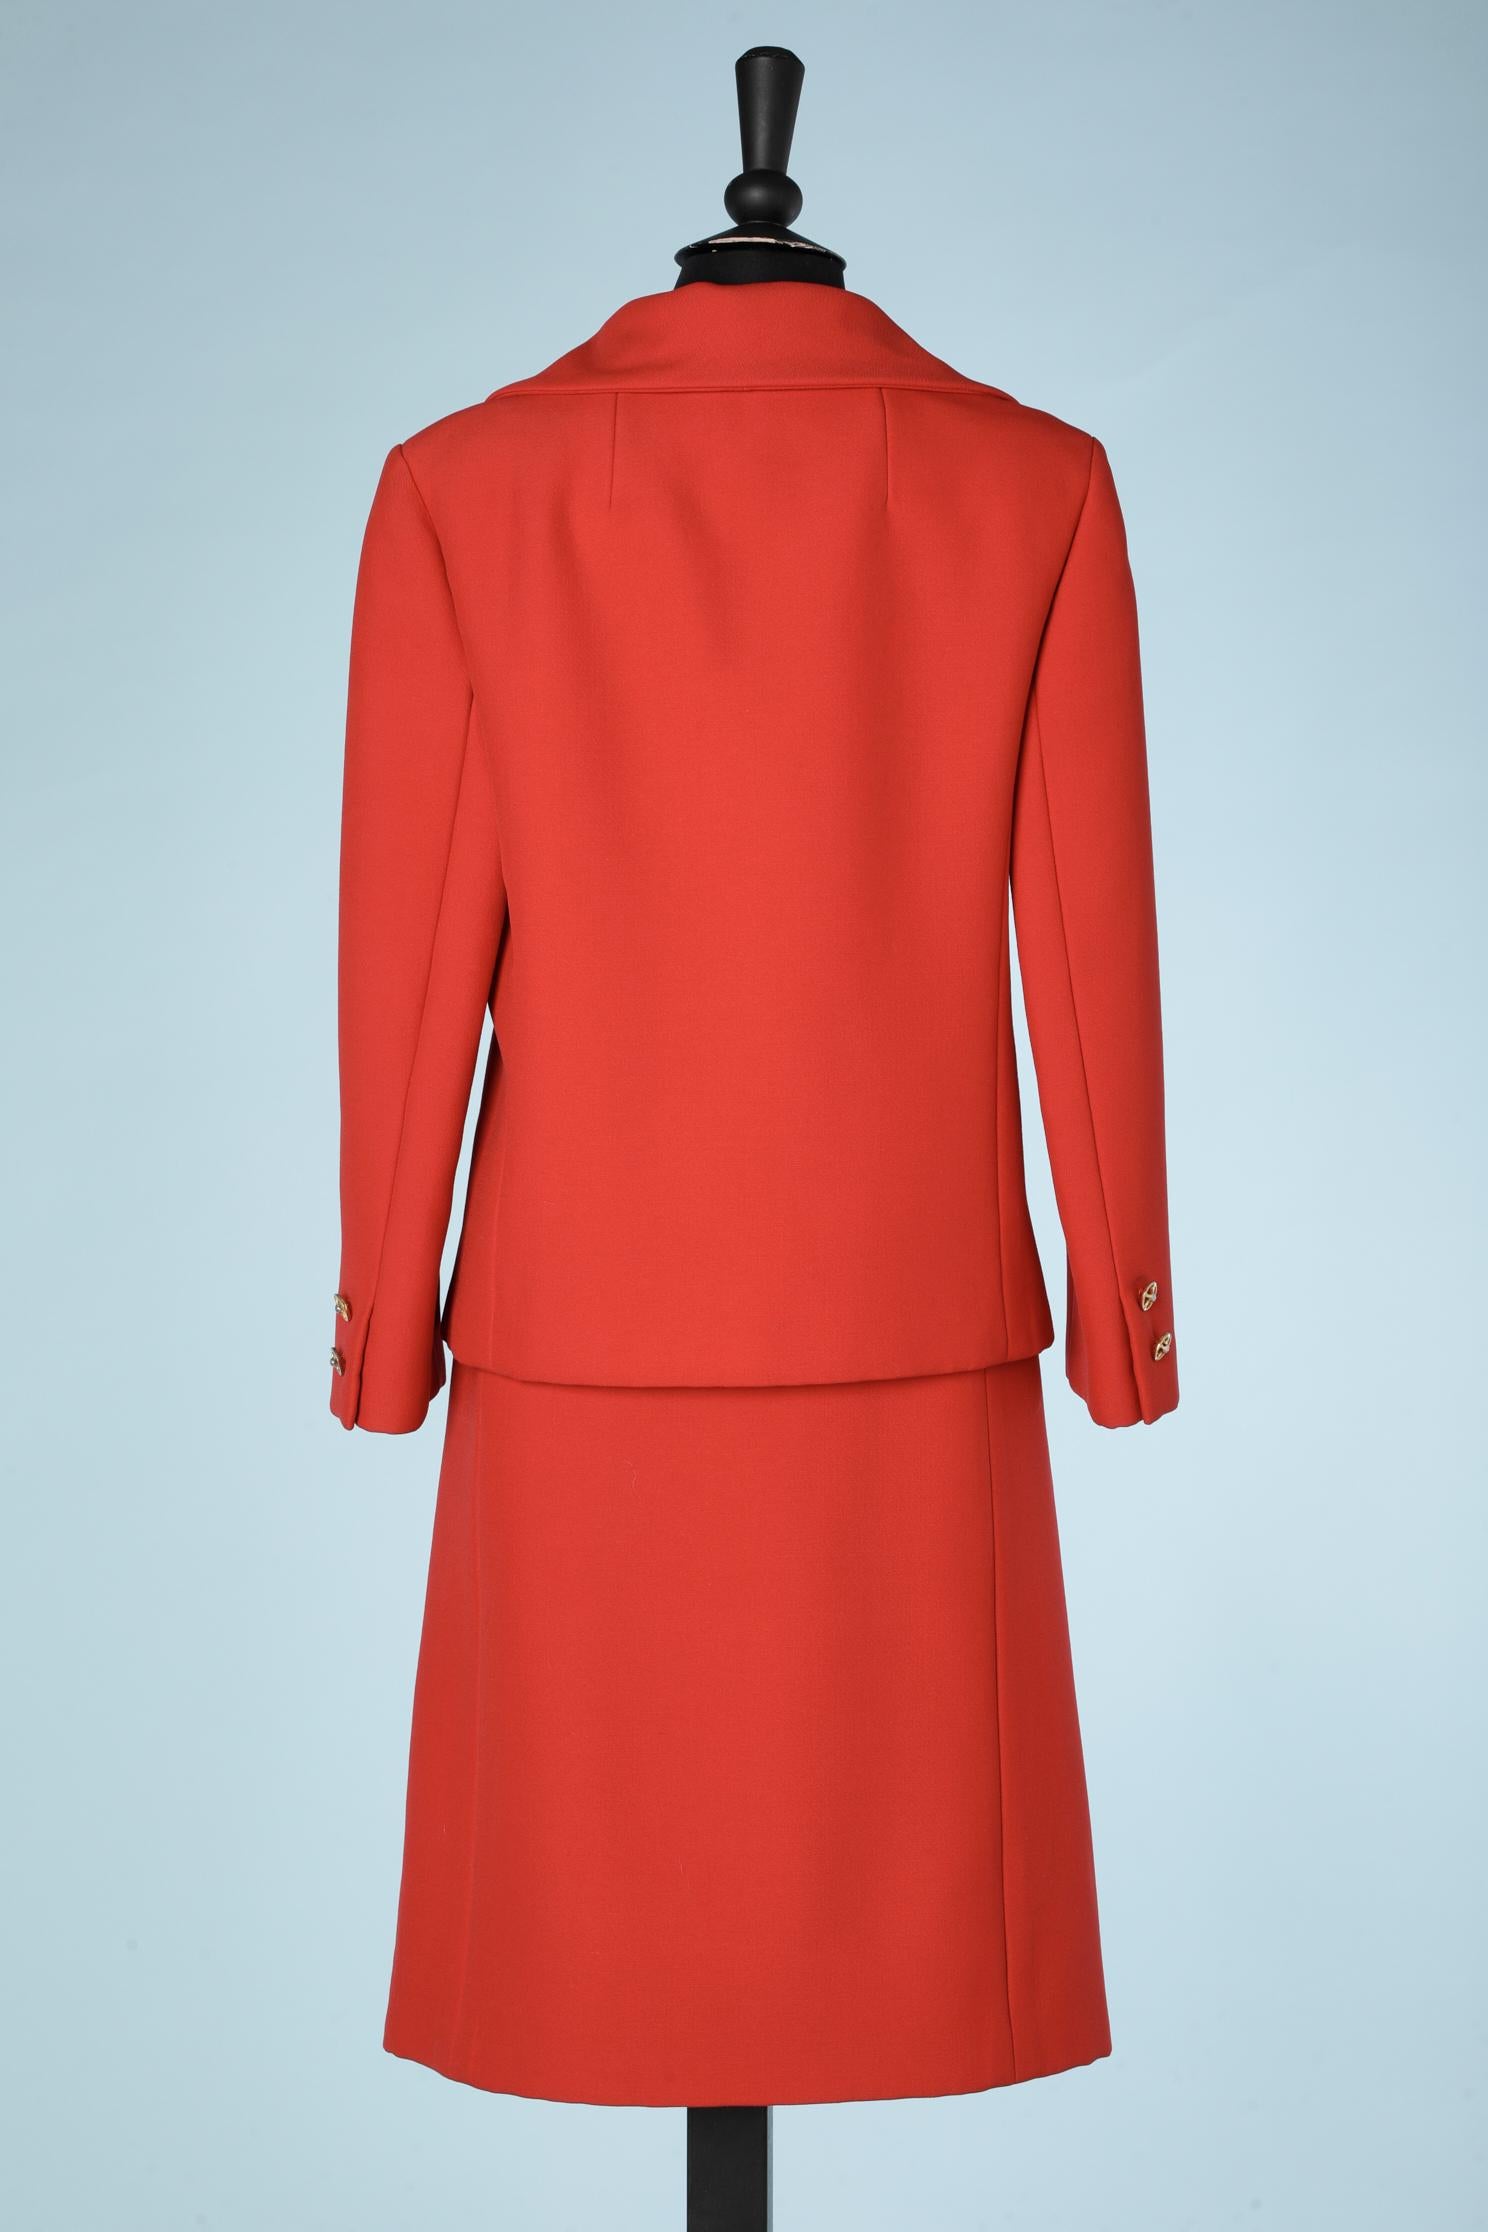 Red wool skirt-suit Christian Dior NY Inc for Bullock's Wilshire 1